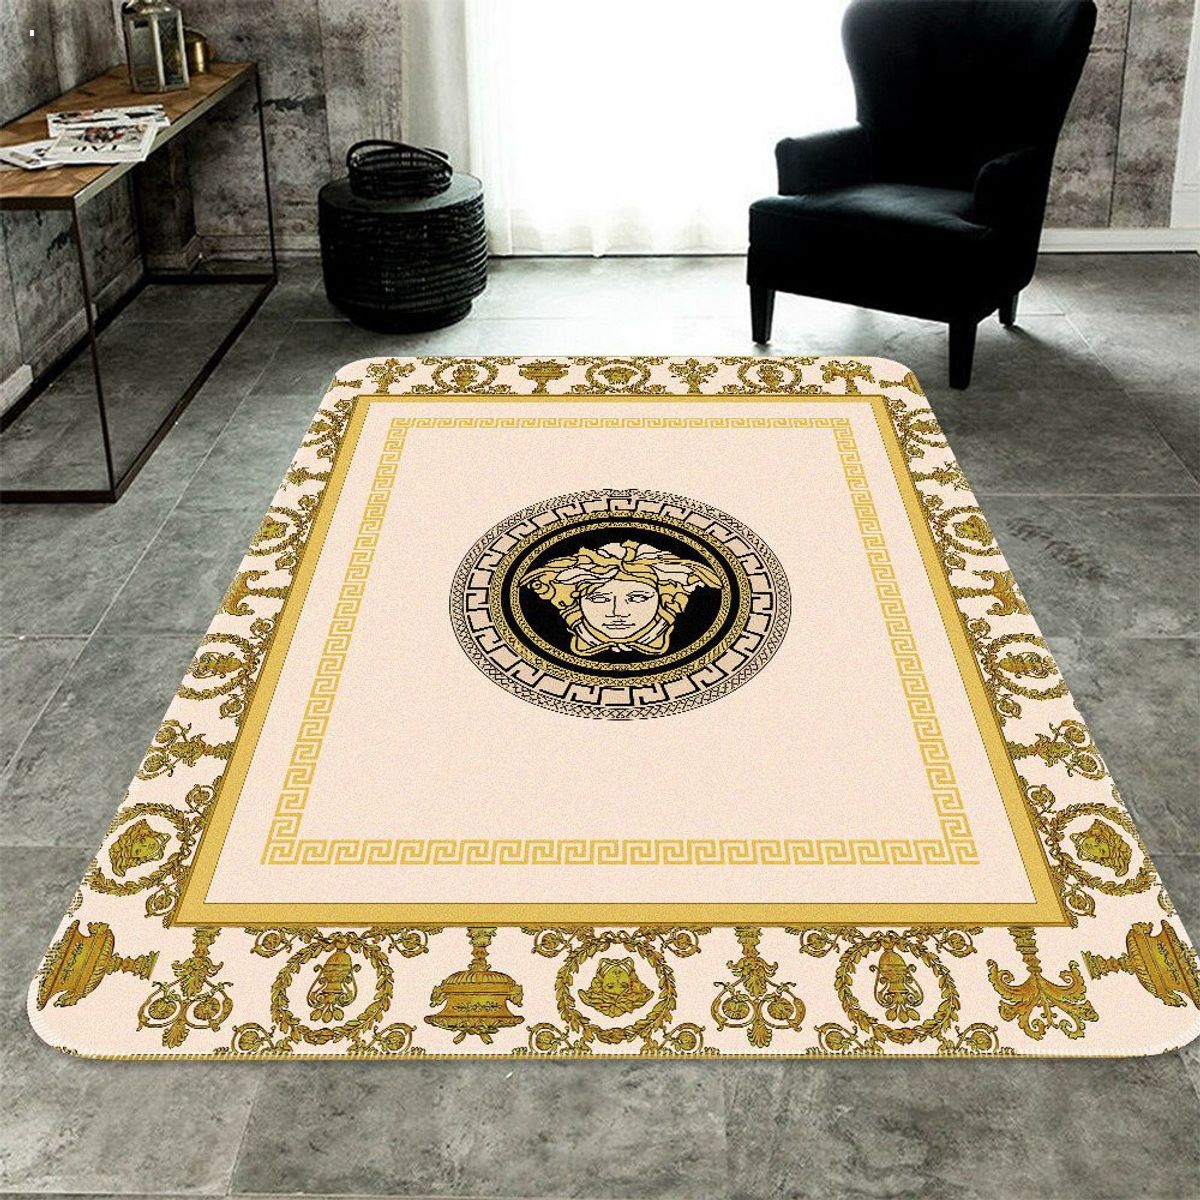 Versace Gold Mix Black Luxury Brand Carpet Rug Limited Edition